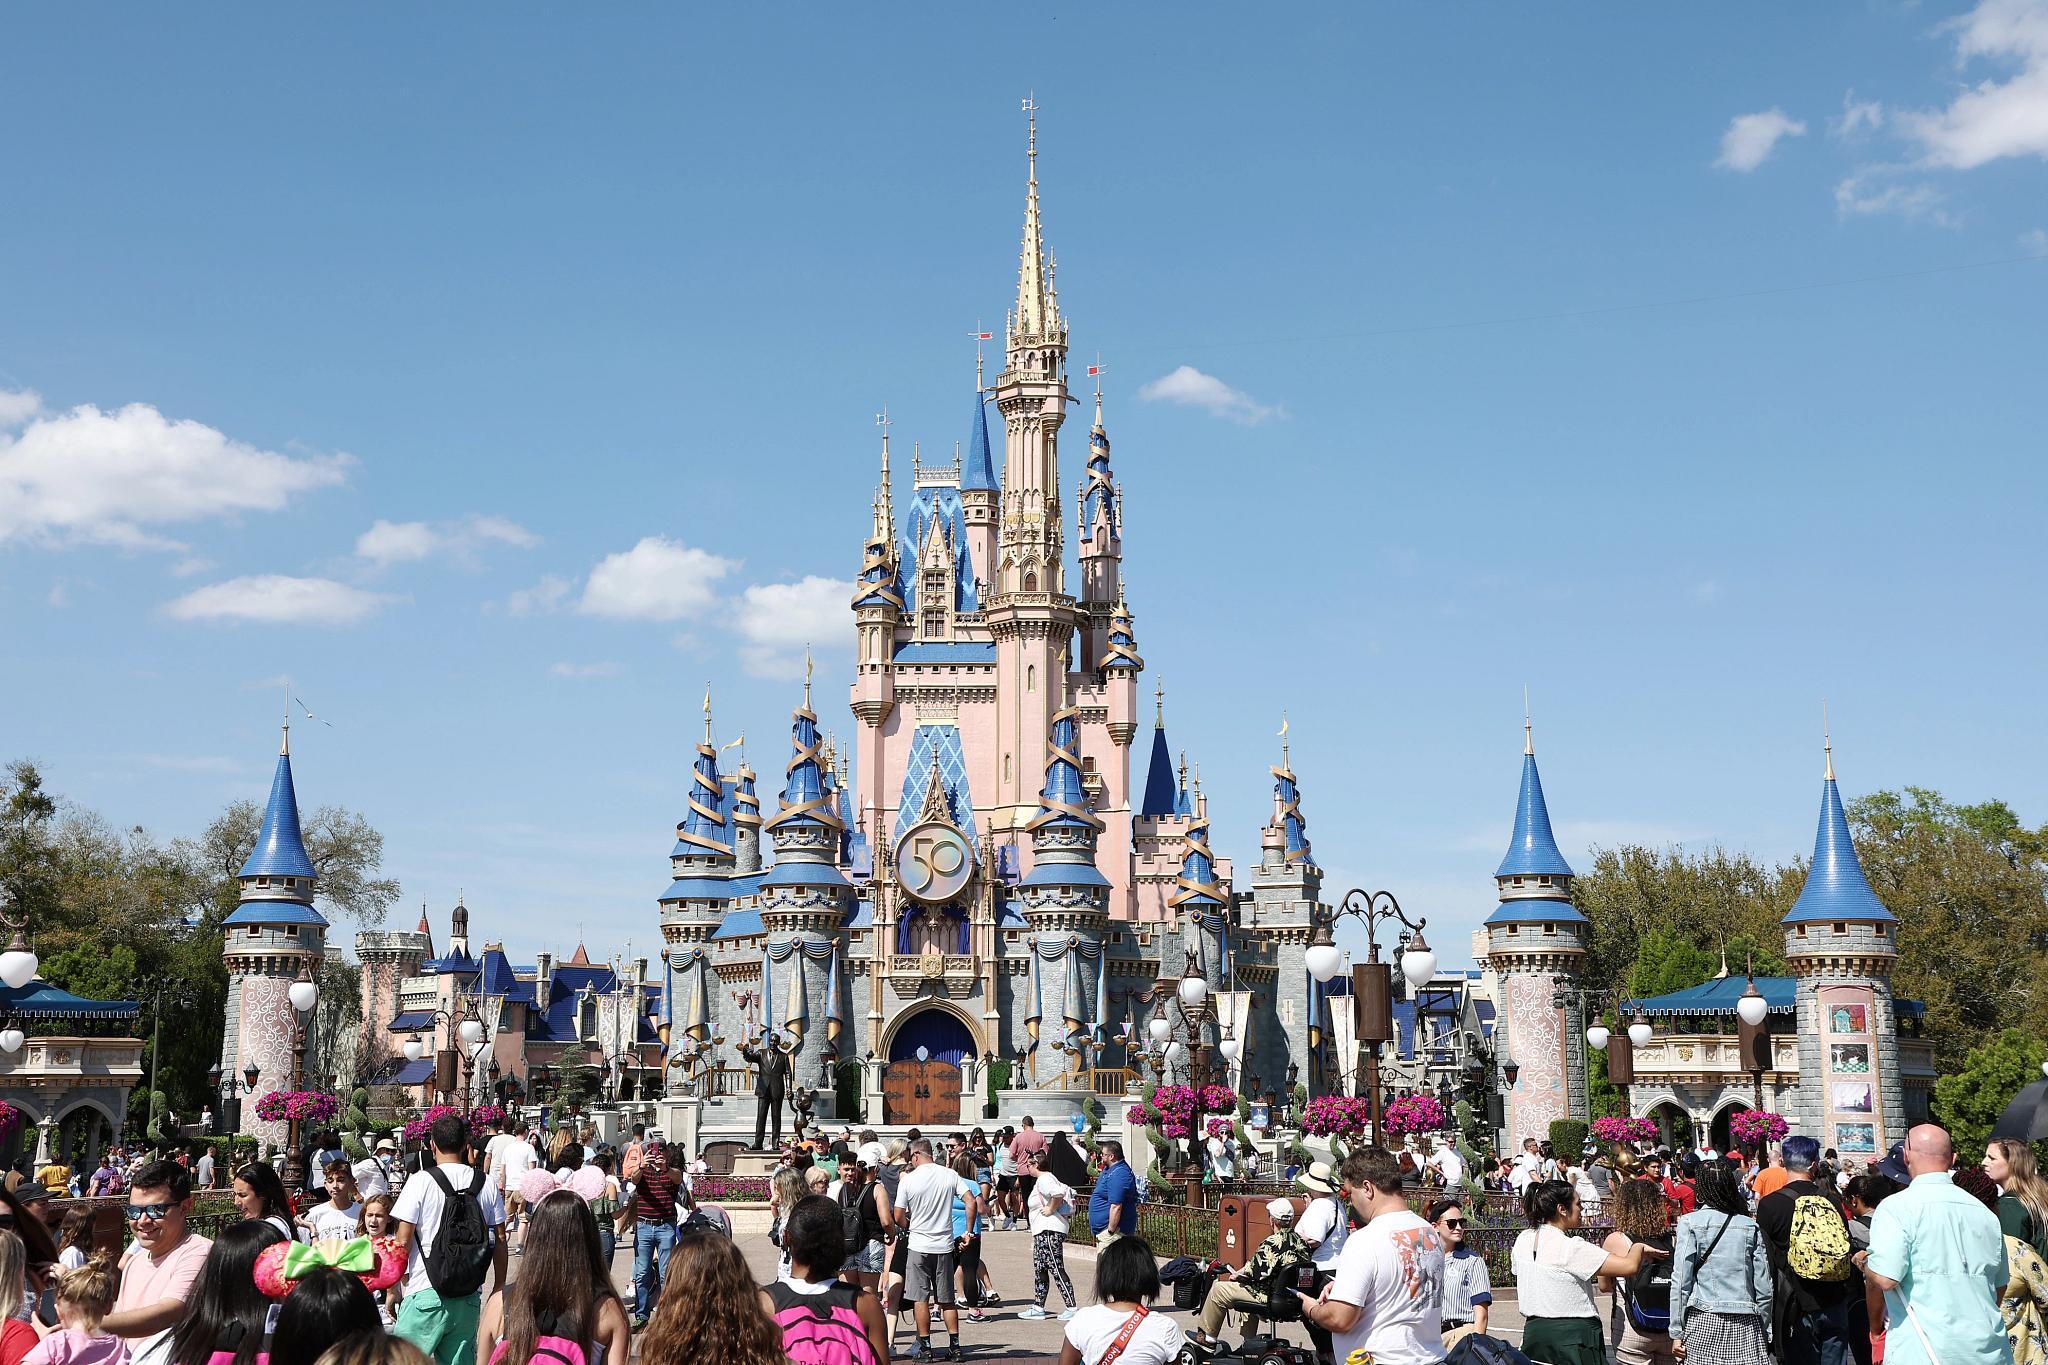 North Carolina lawmakers are trying to entice Disney to move the Florida theme park attractions to their state. (Getty Images)